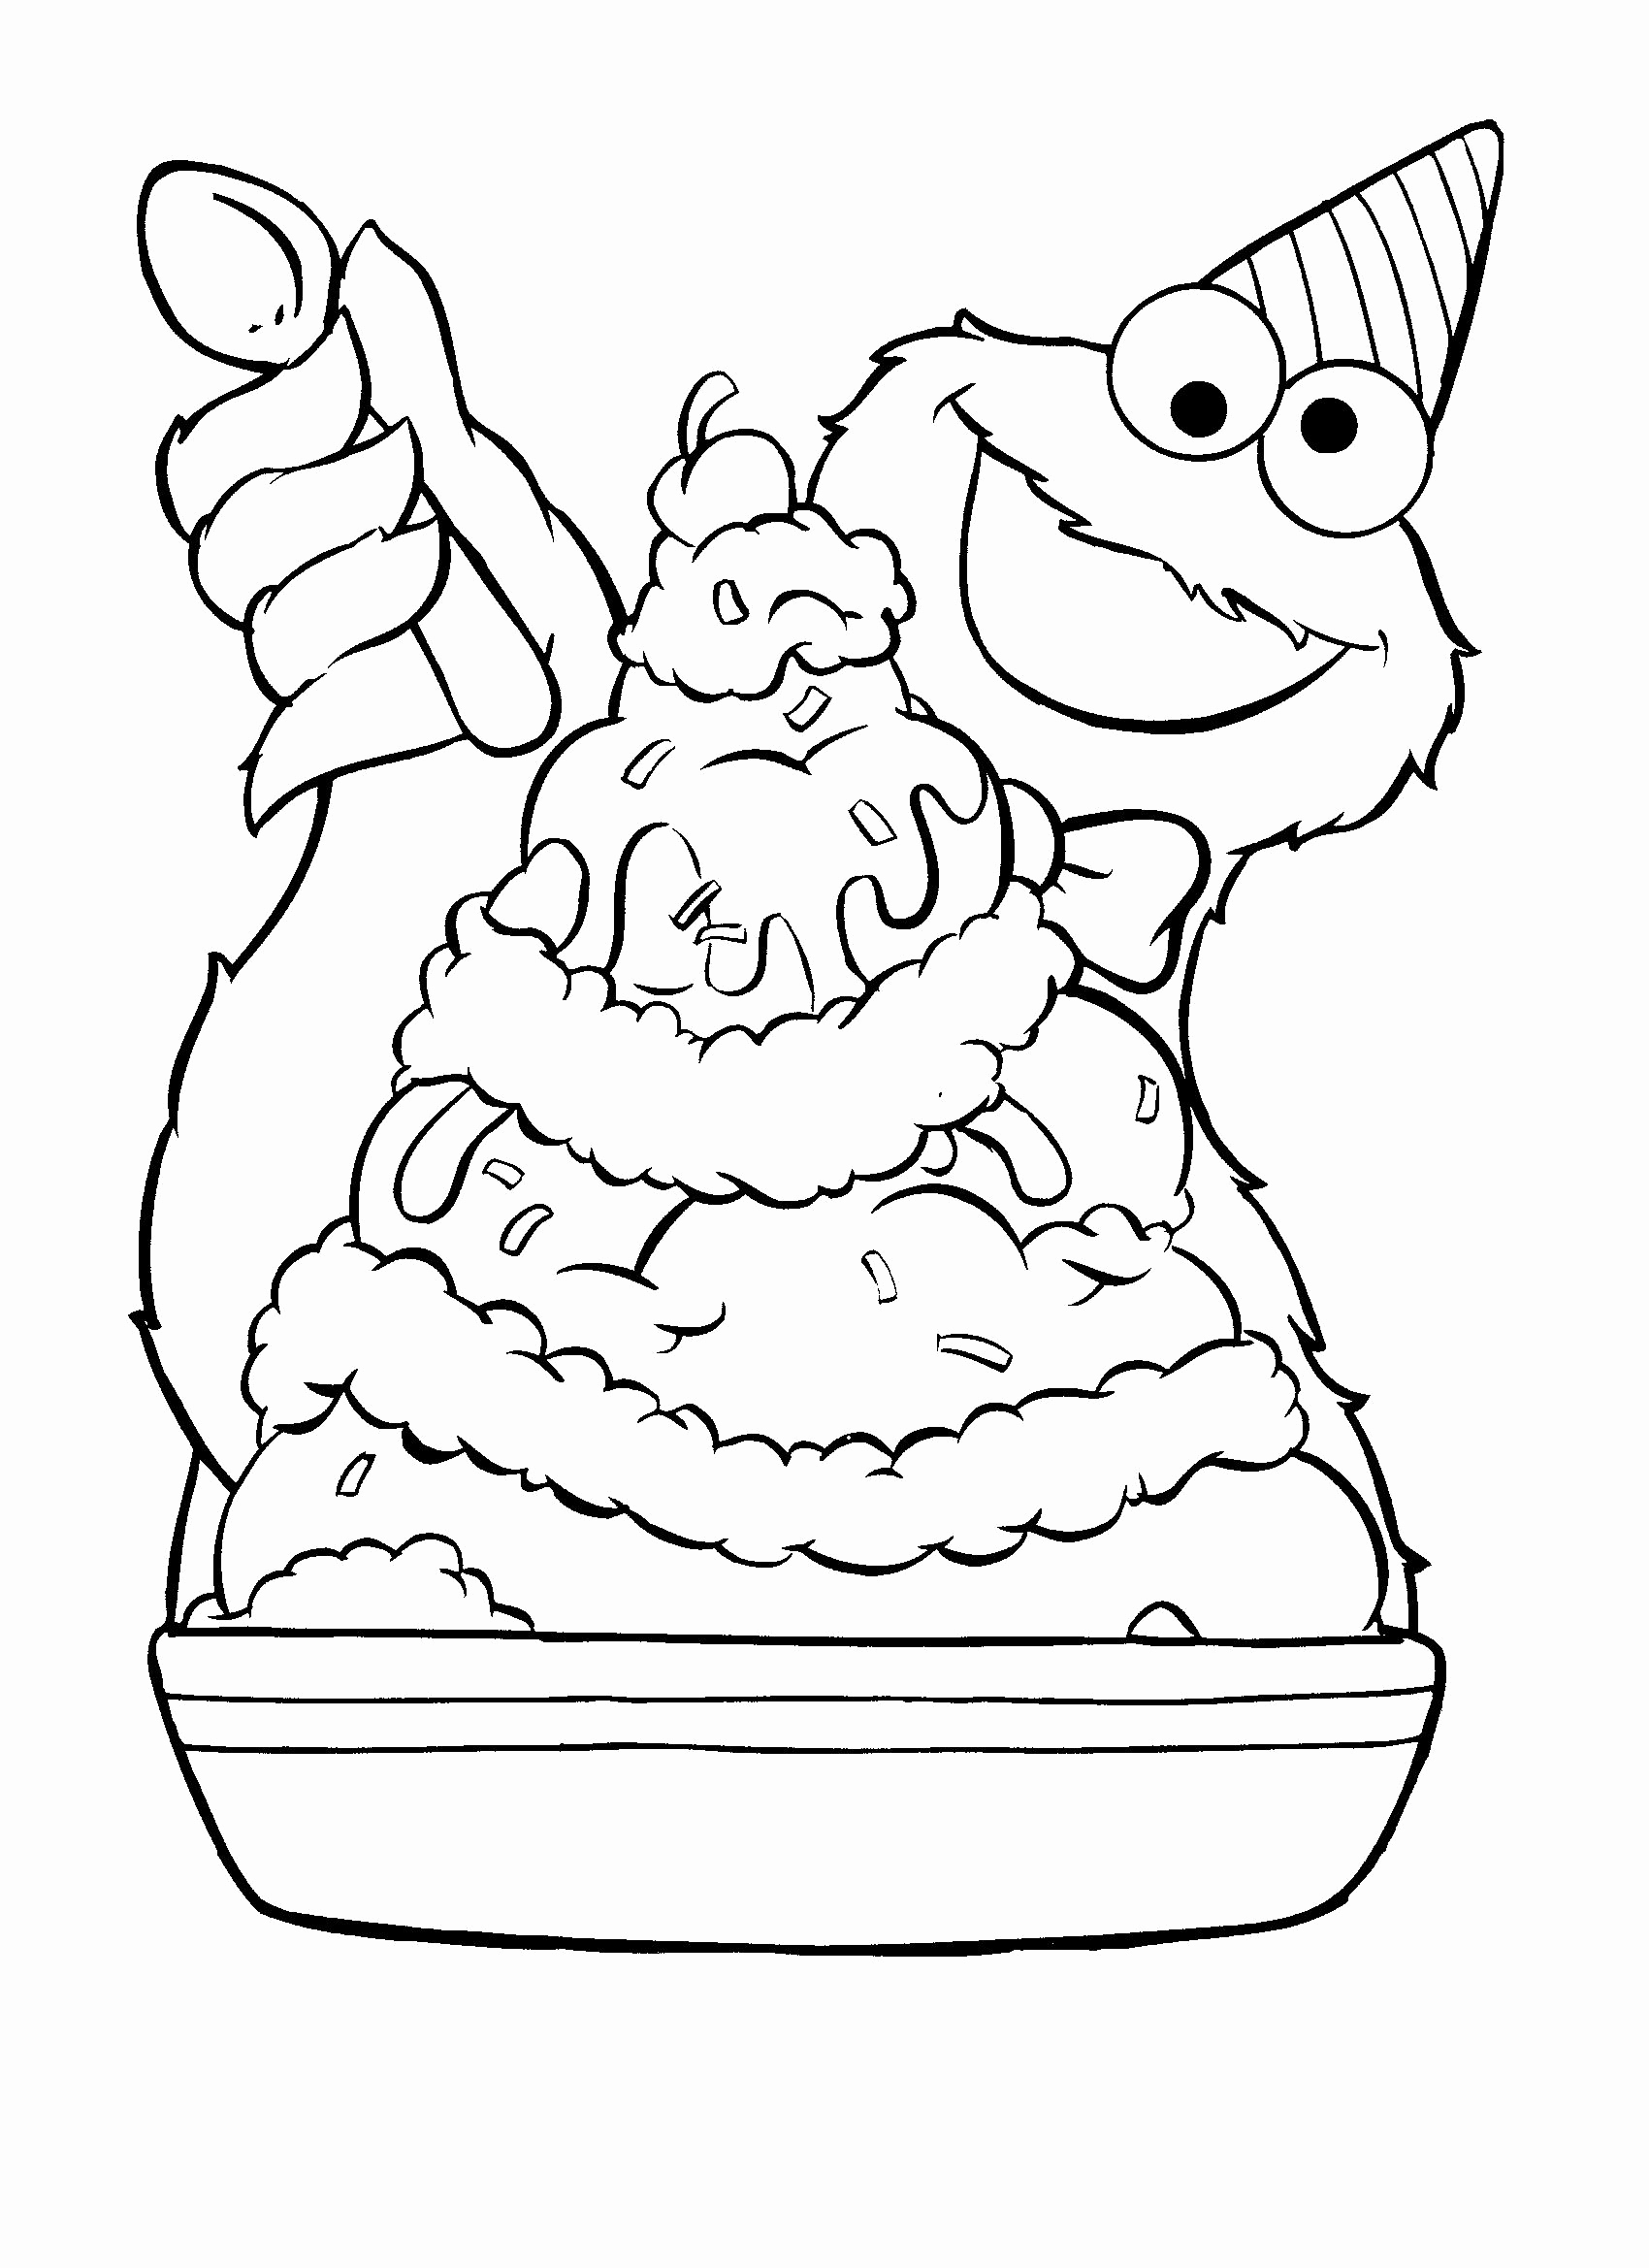 cookie-monster-coloring-page-at-getcolorings-free-printable-colorings-pages-to-print-and-color